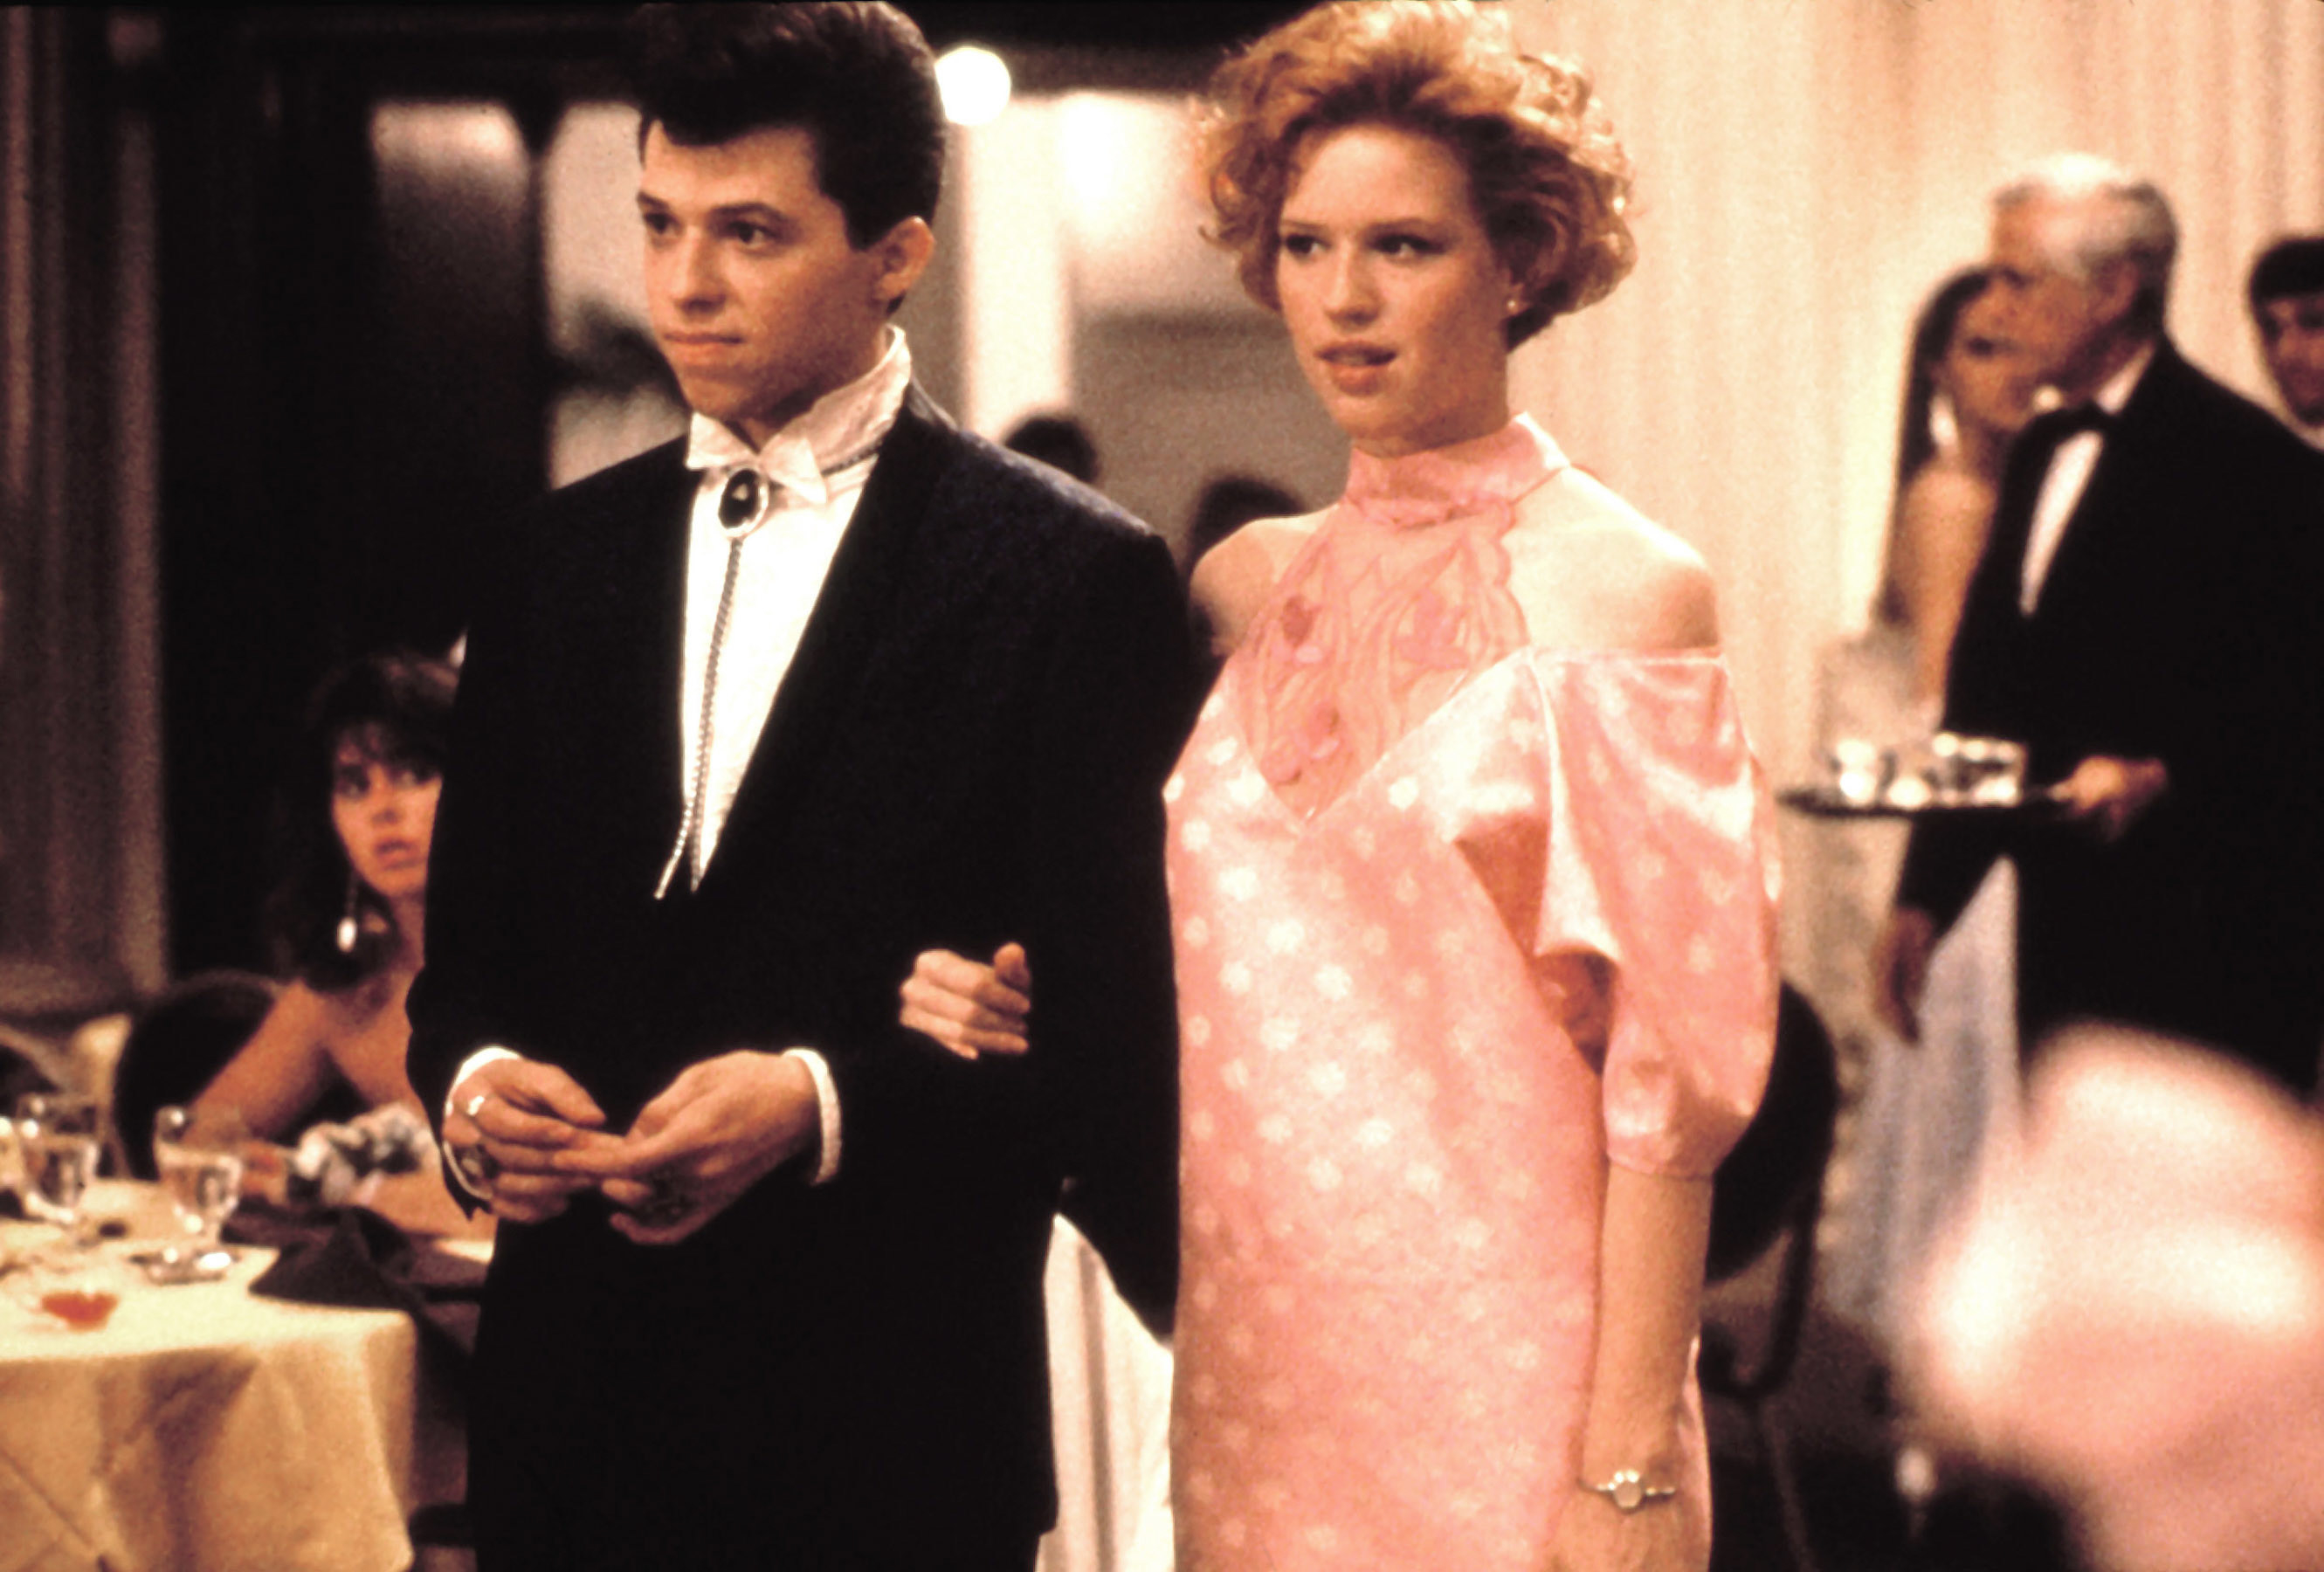 Jon Cryer and Molly Ringwald in Pretty in Pink